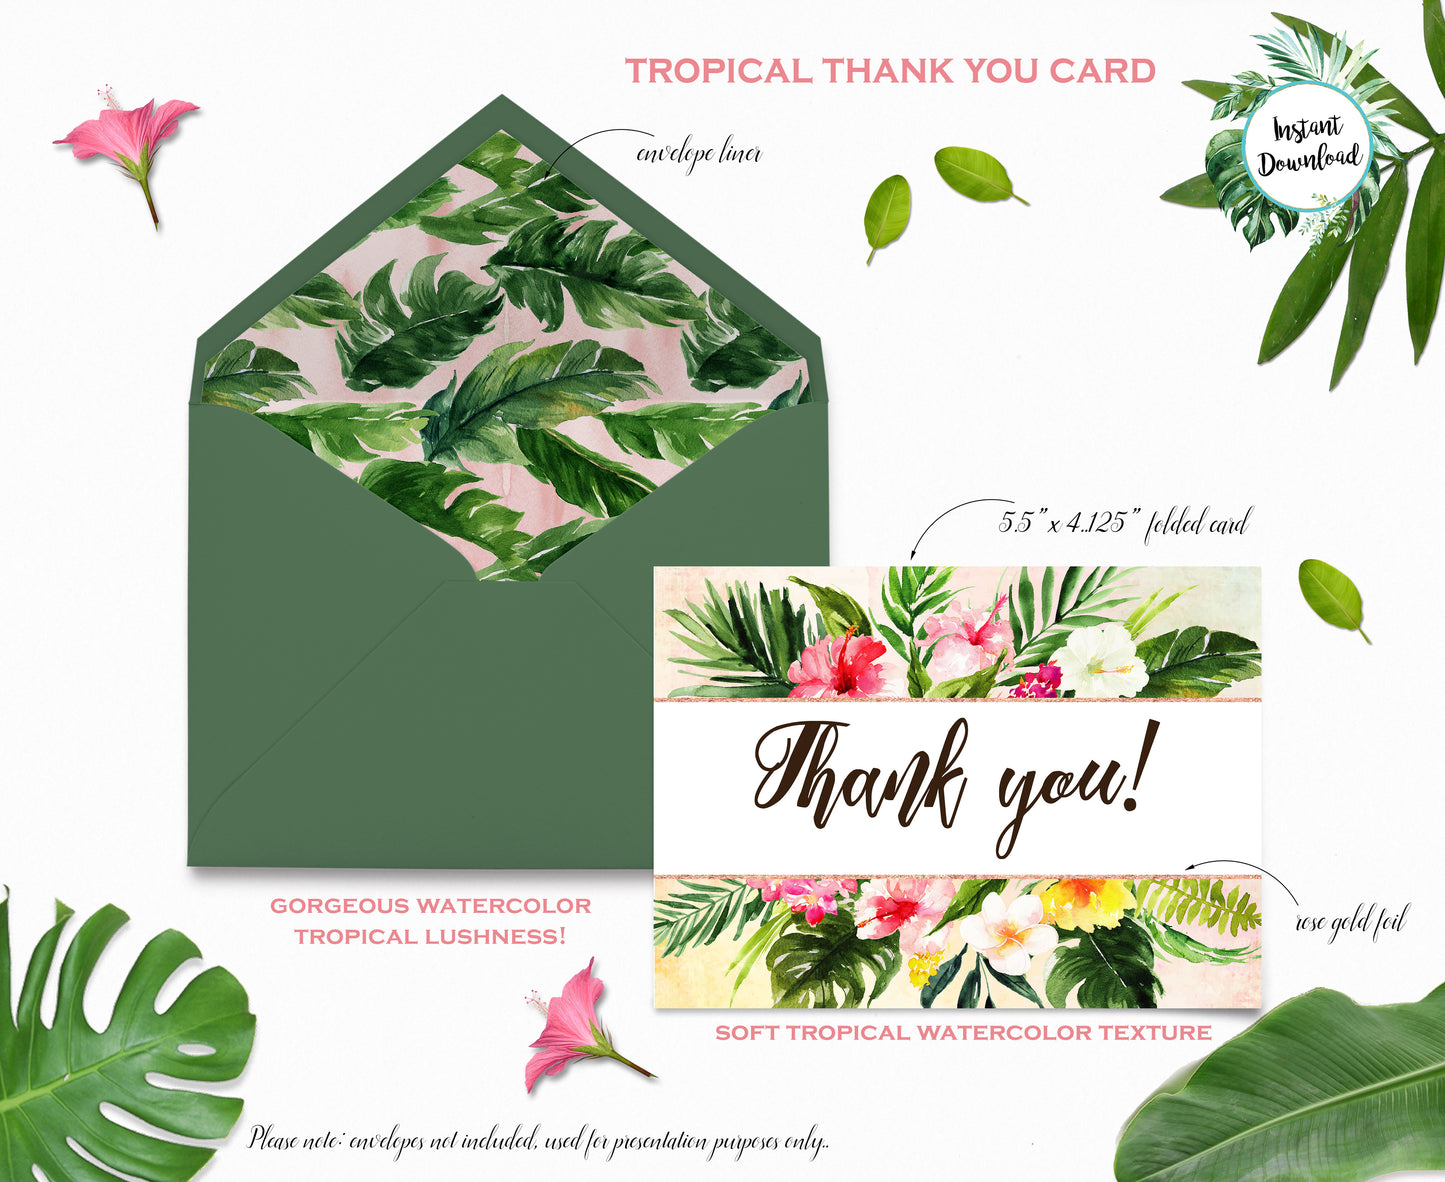 Tropical Floral Watercolor Beach Destination Thank You Cards and Tags Digital "Instant Download" - 'TROPICAL LUSH"